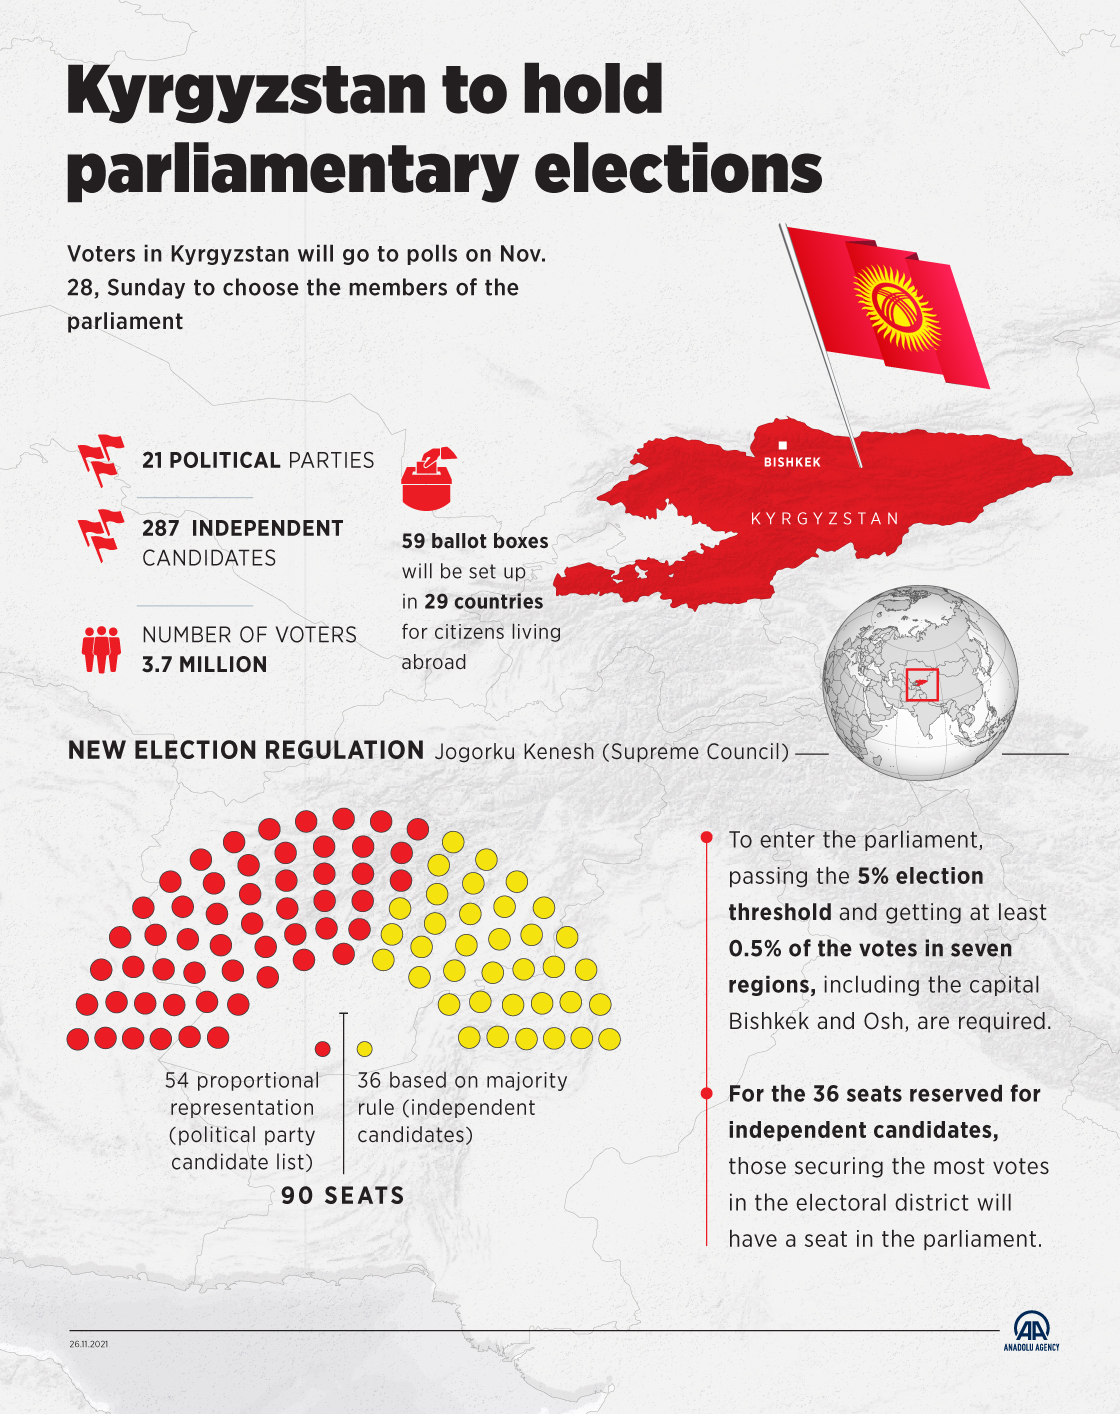 Kyrgyzstan to hold parliamentary elections